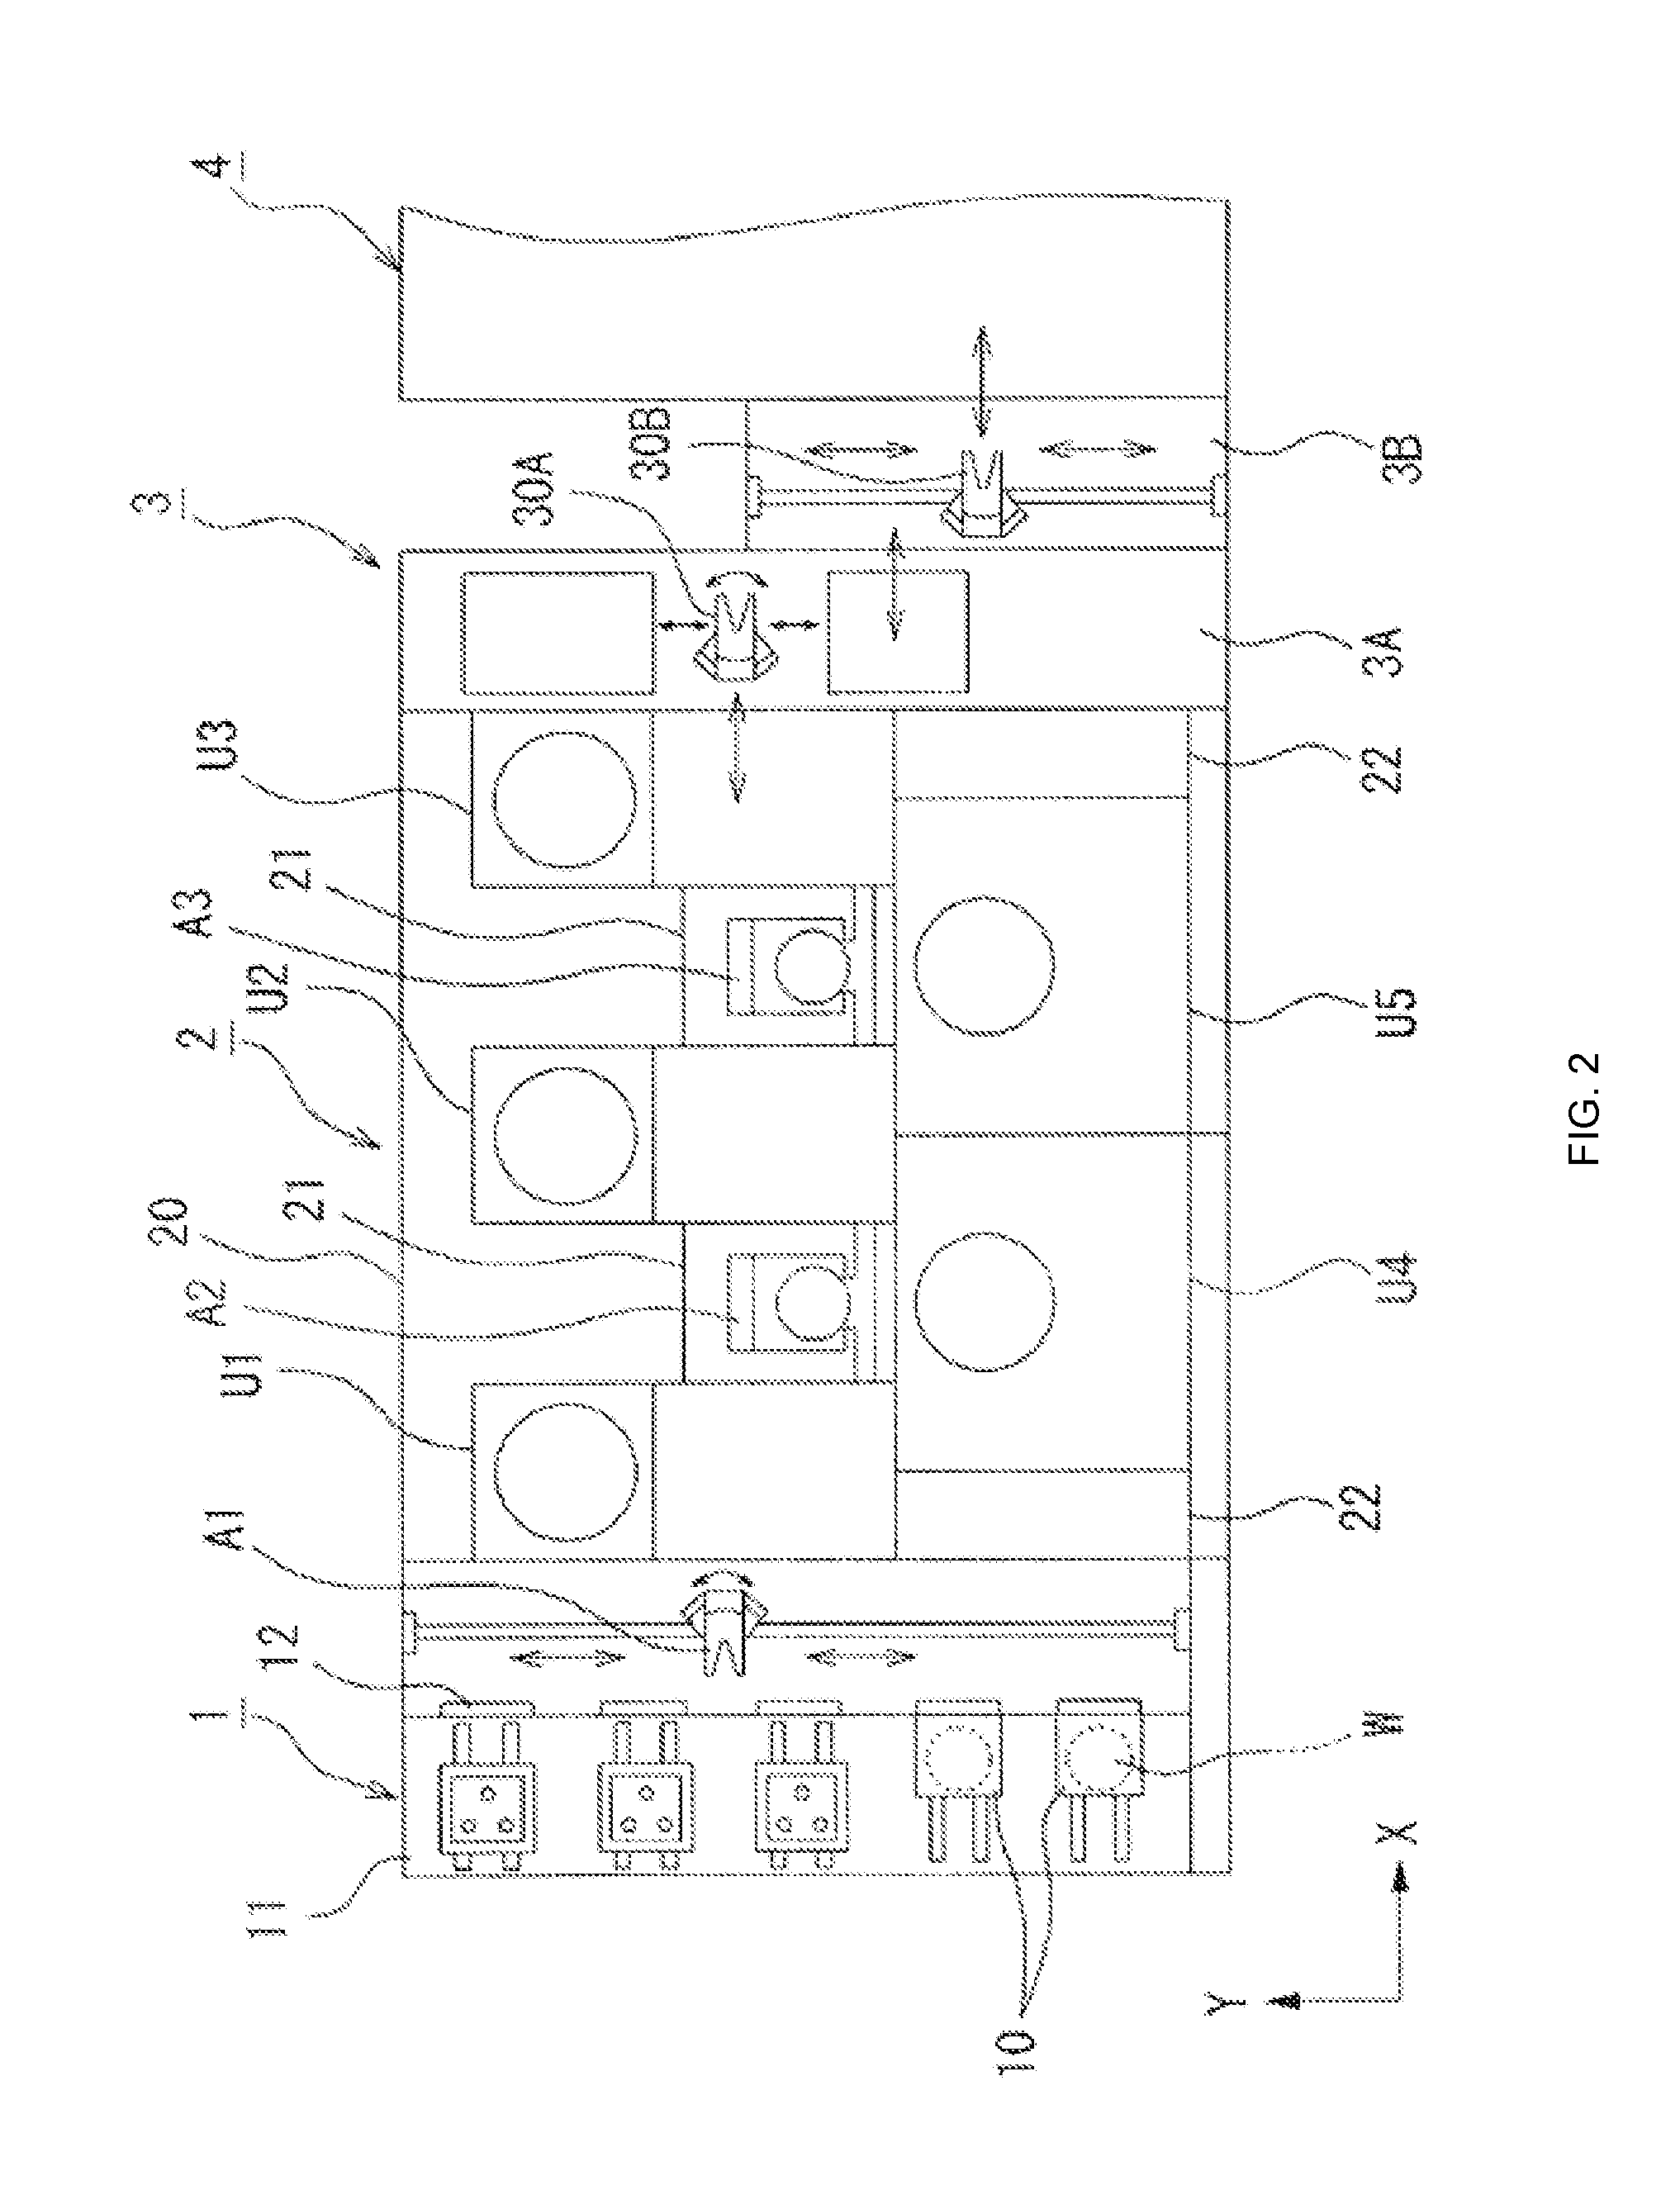 Method and apparatus for increased recirculation and filtration in a photoresist dispense system using a recirculation pump/loop